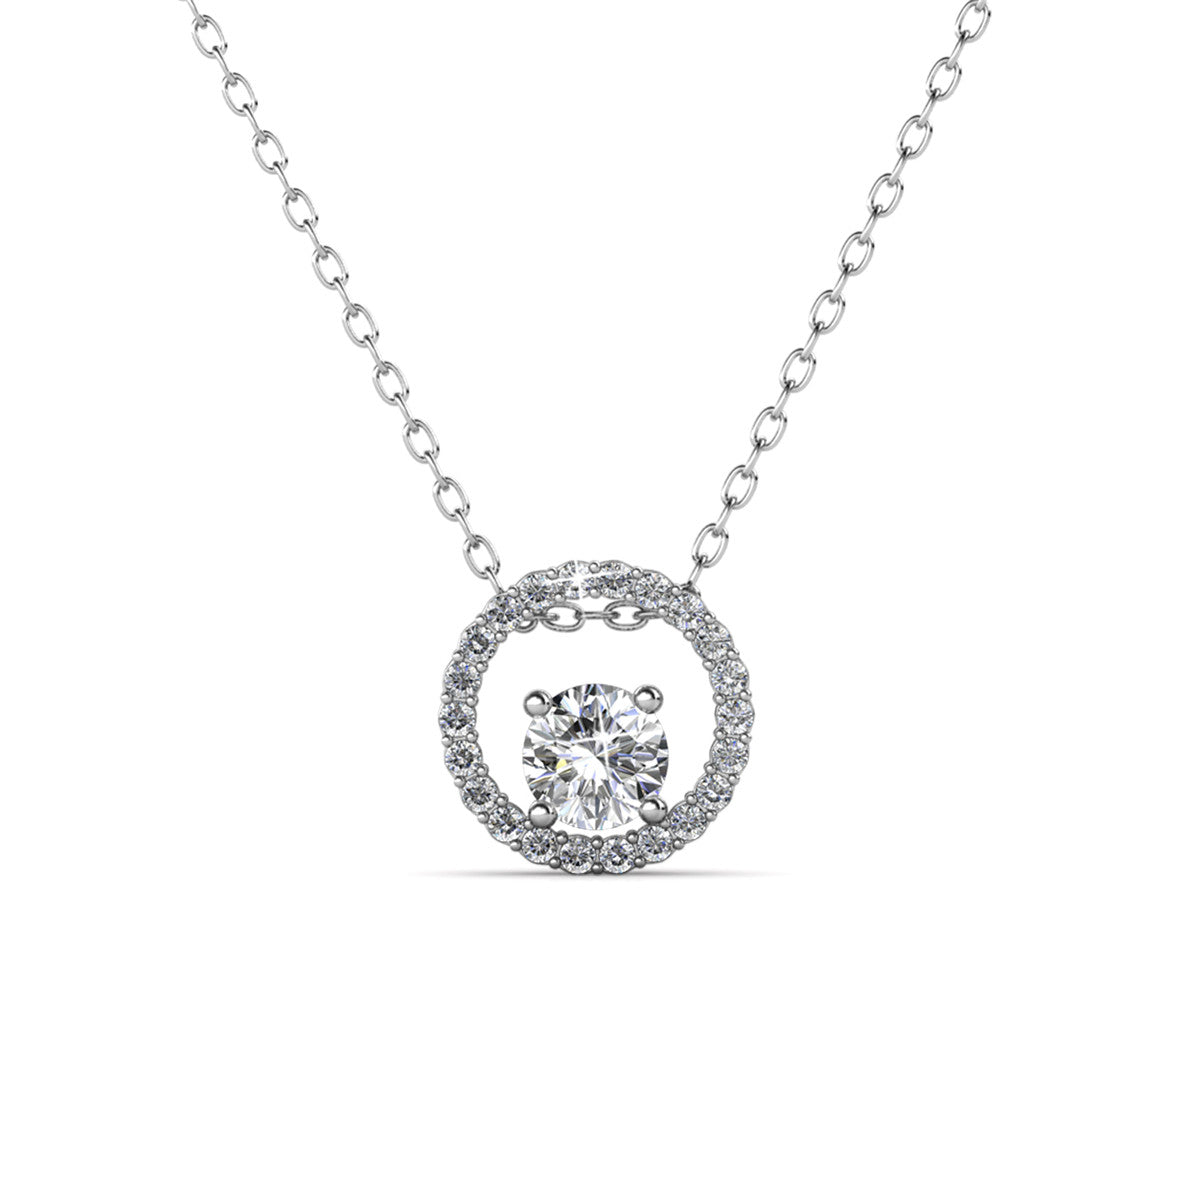 Reign 18k White Gold Plated Halo Crystal Necklace